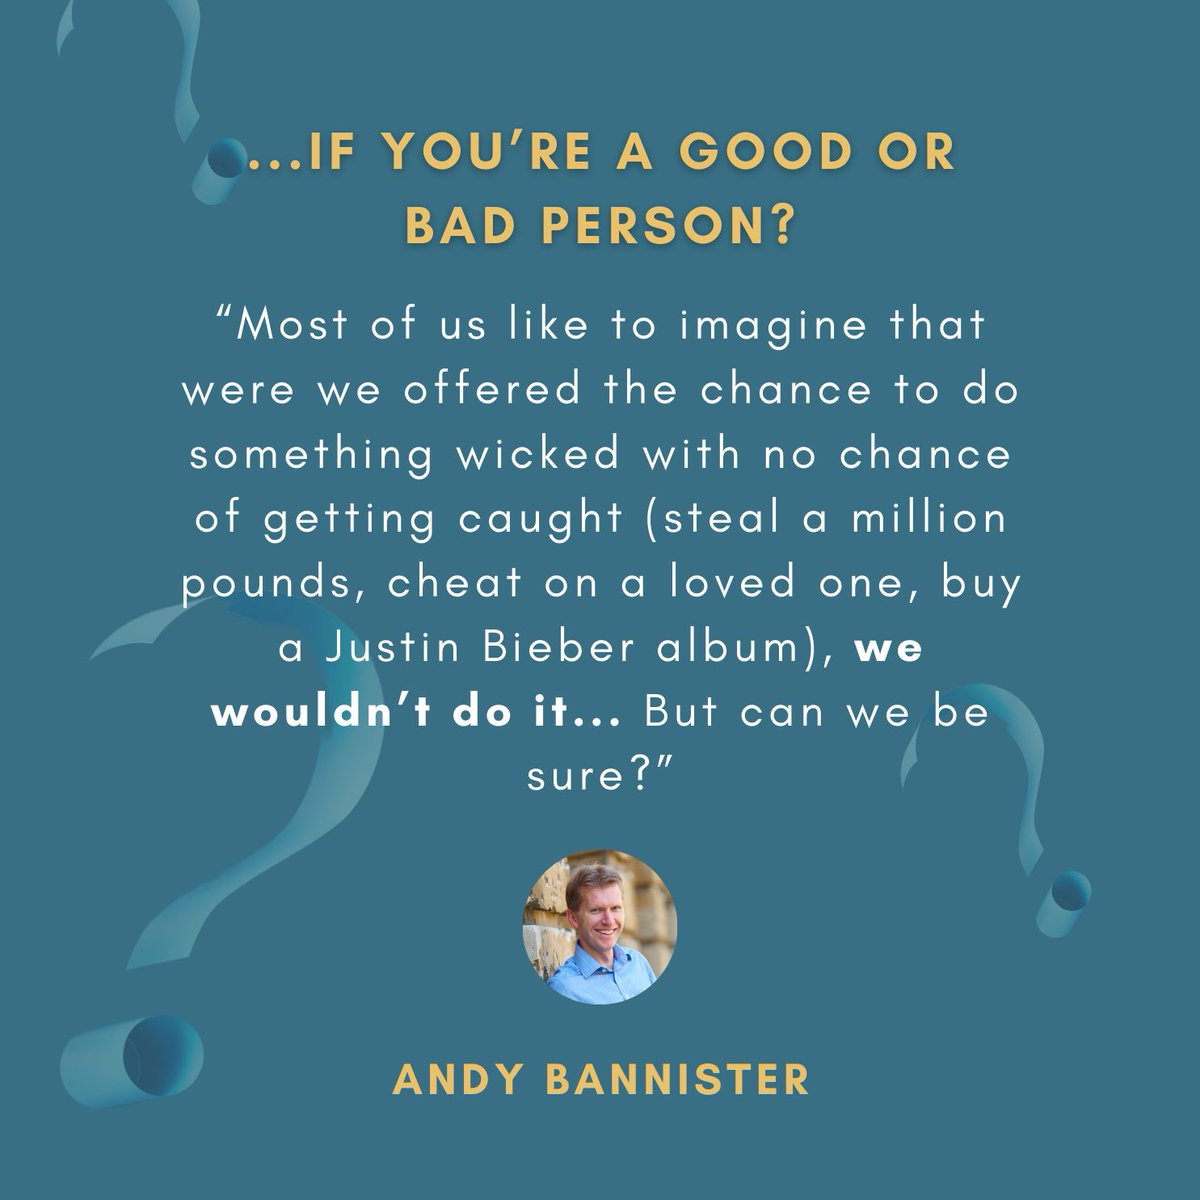 Have you ever wondered if you're a good or a bad person? We like to think we're decent, just, fair and kind — but why? Check out buff.ly/3UpP7sx for this and other great spiritual conversation starters in the brand new book from @solascpc.